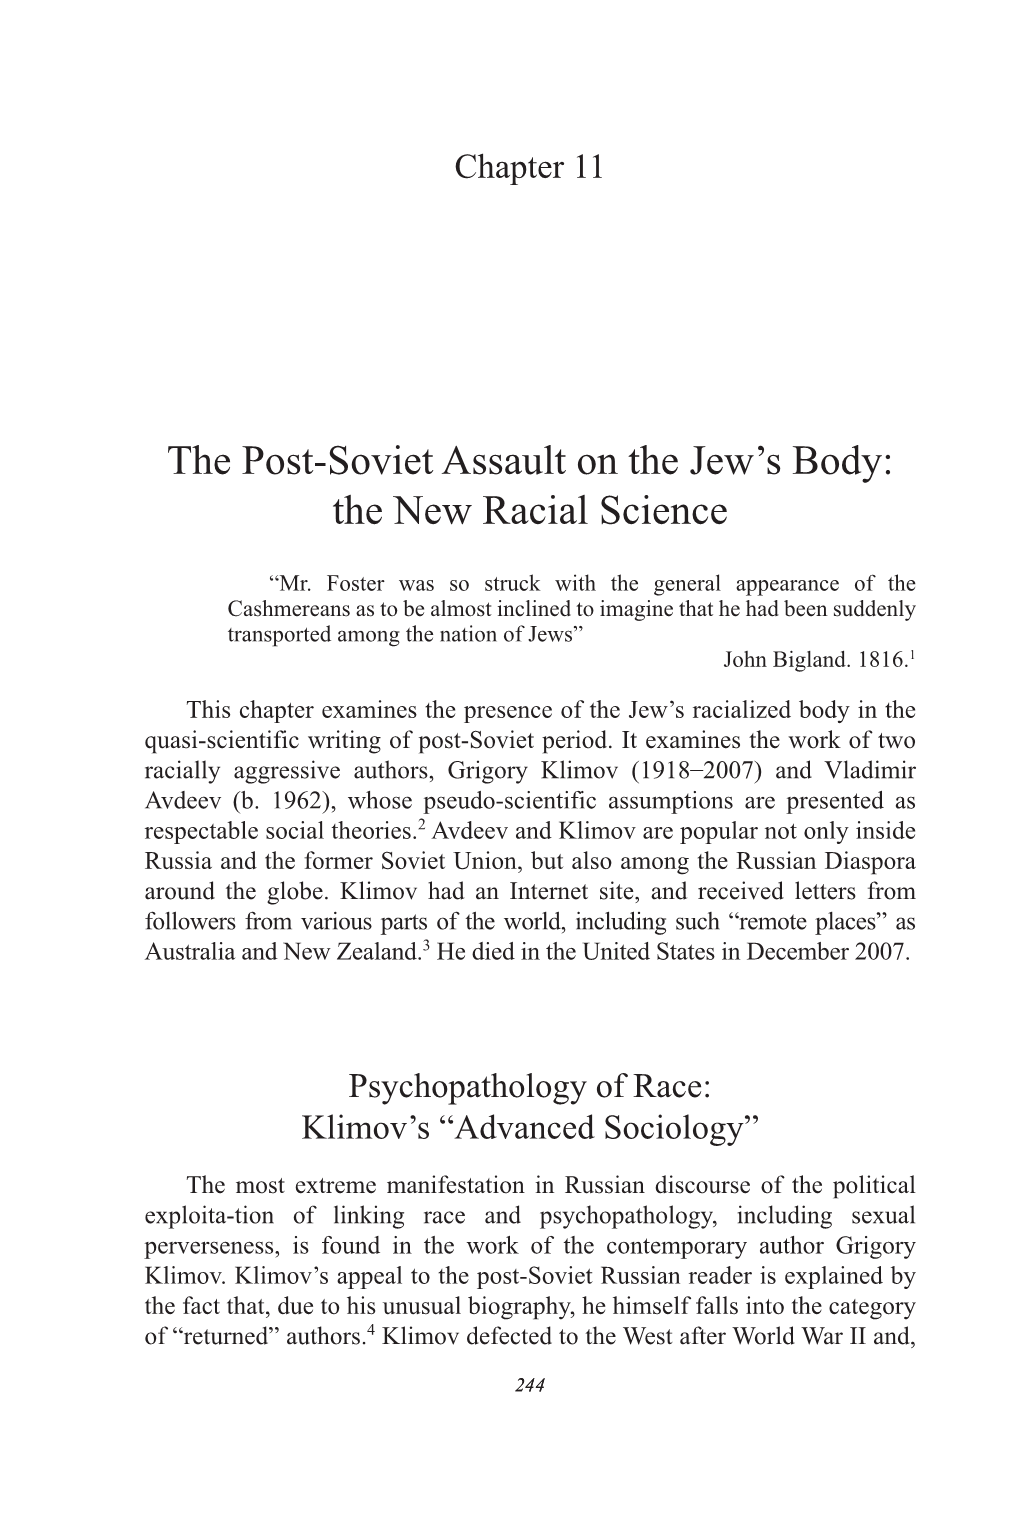 The Post-Soviet Assault on the Jew's Body: the New Racial Science